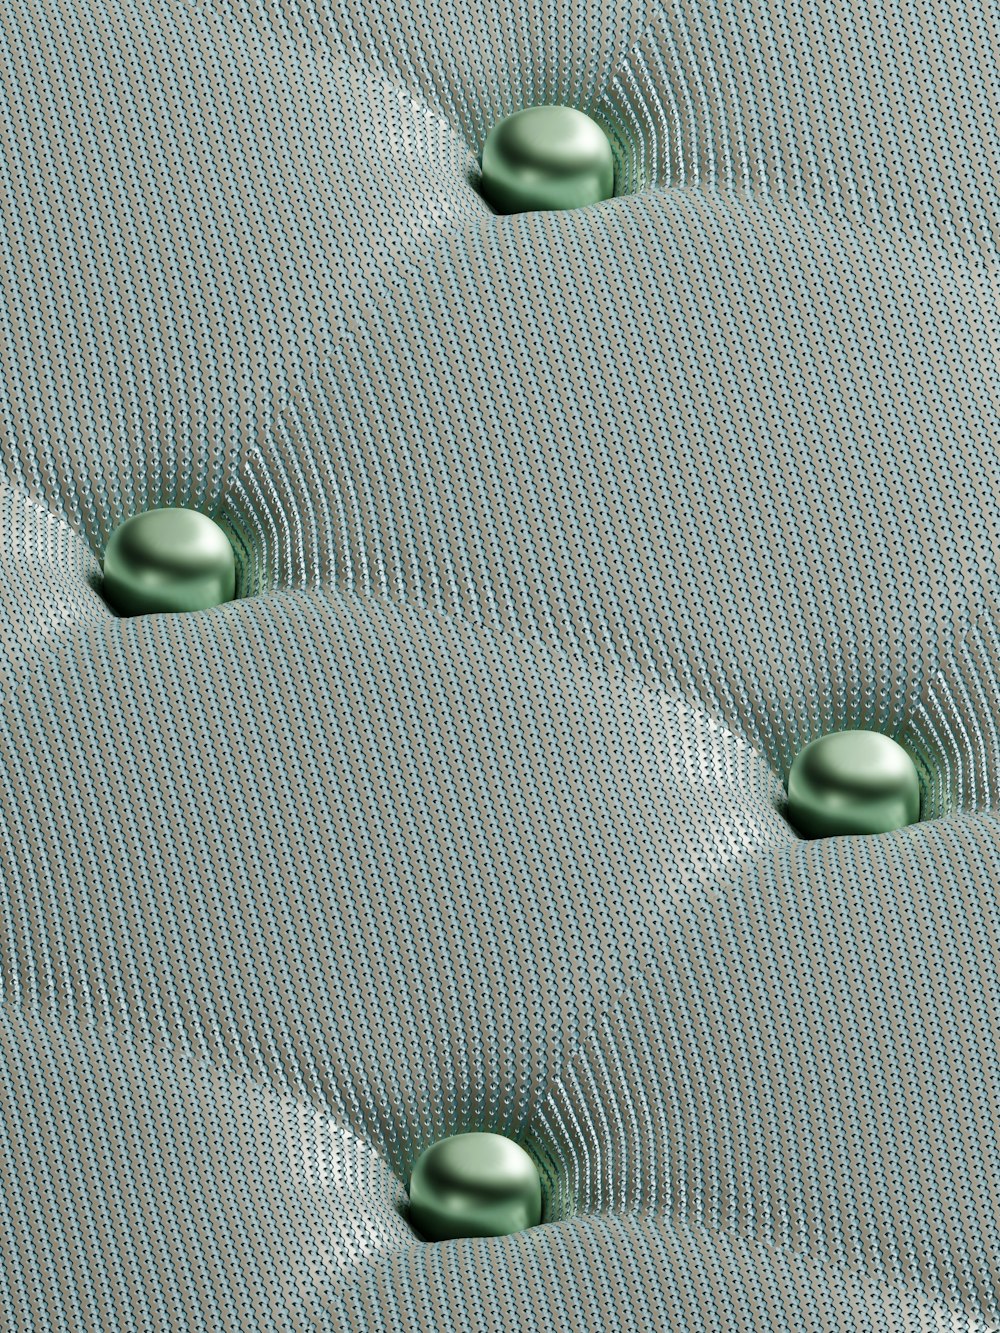 a close up of a metal surface with a lot of bubbles